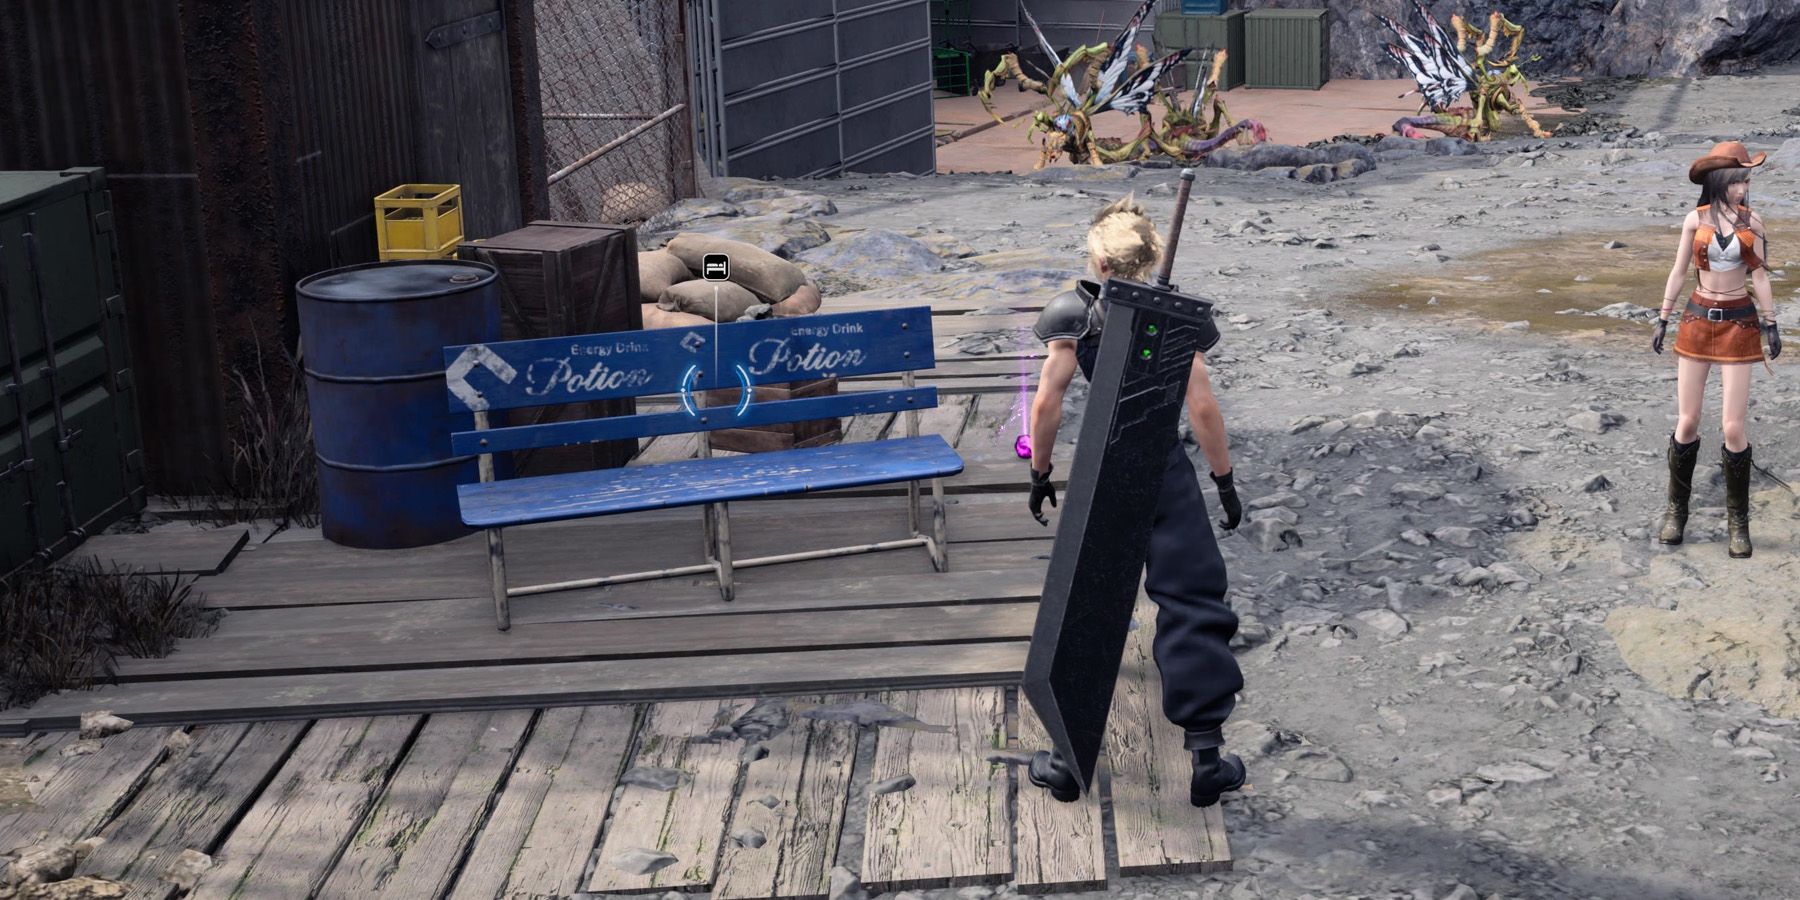 Cloud looking at a bench ro rest at in FF7 Rebirth.